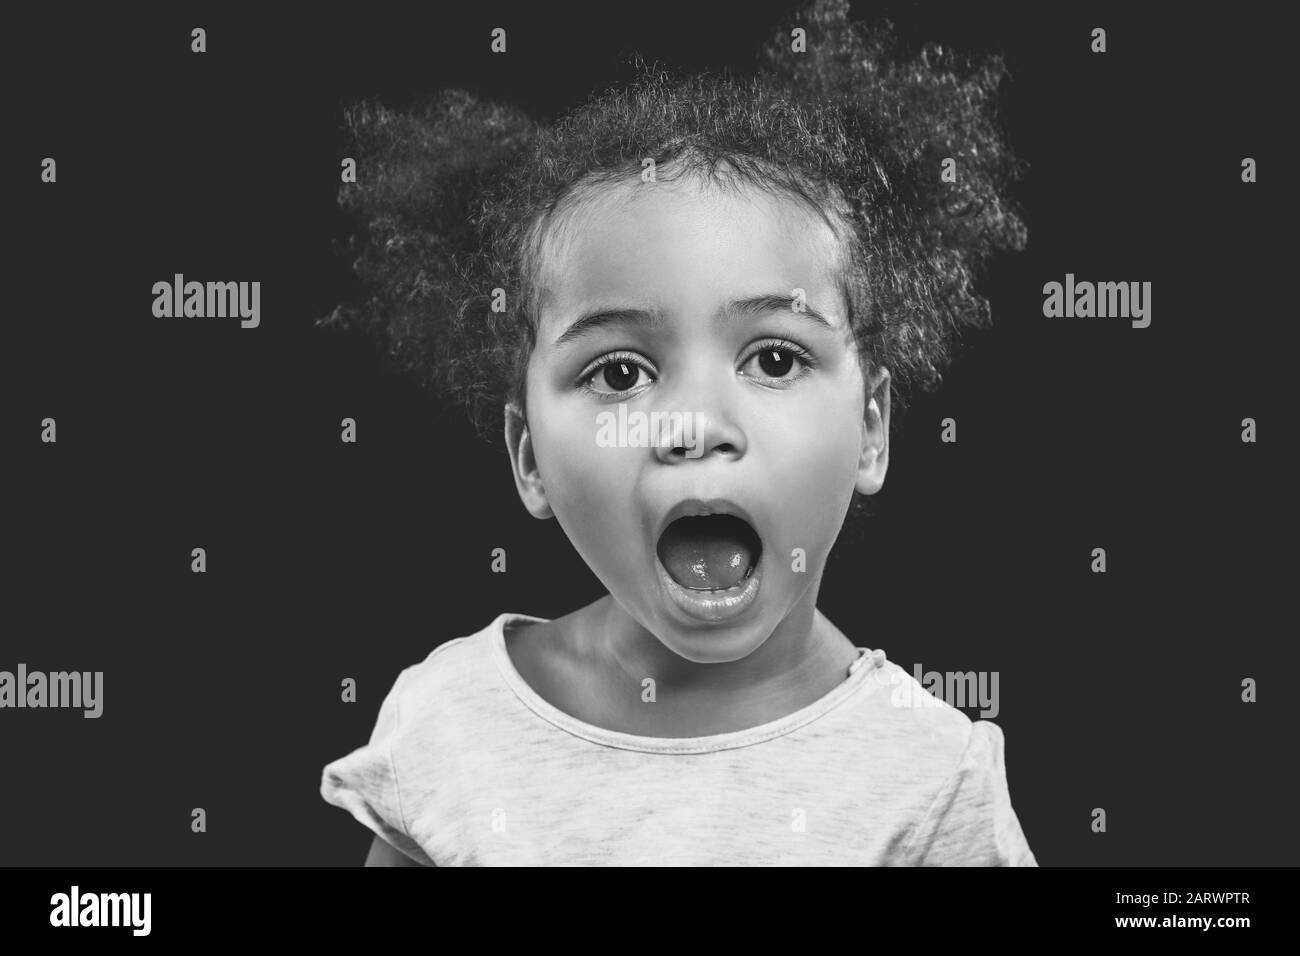 Black and white portrait of little African-American girl on dark background Stock Photo